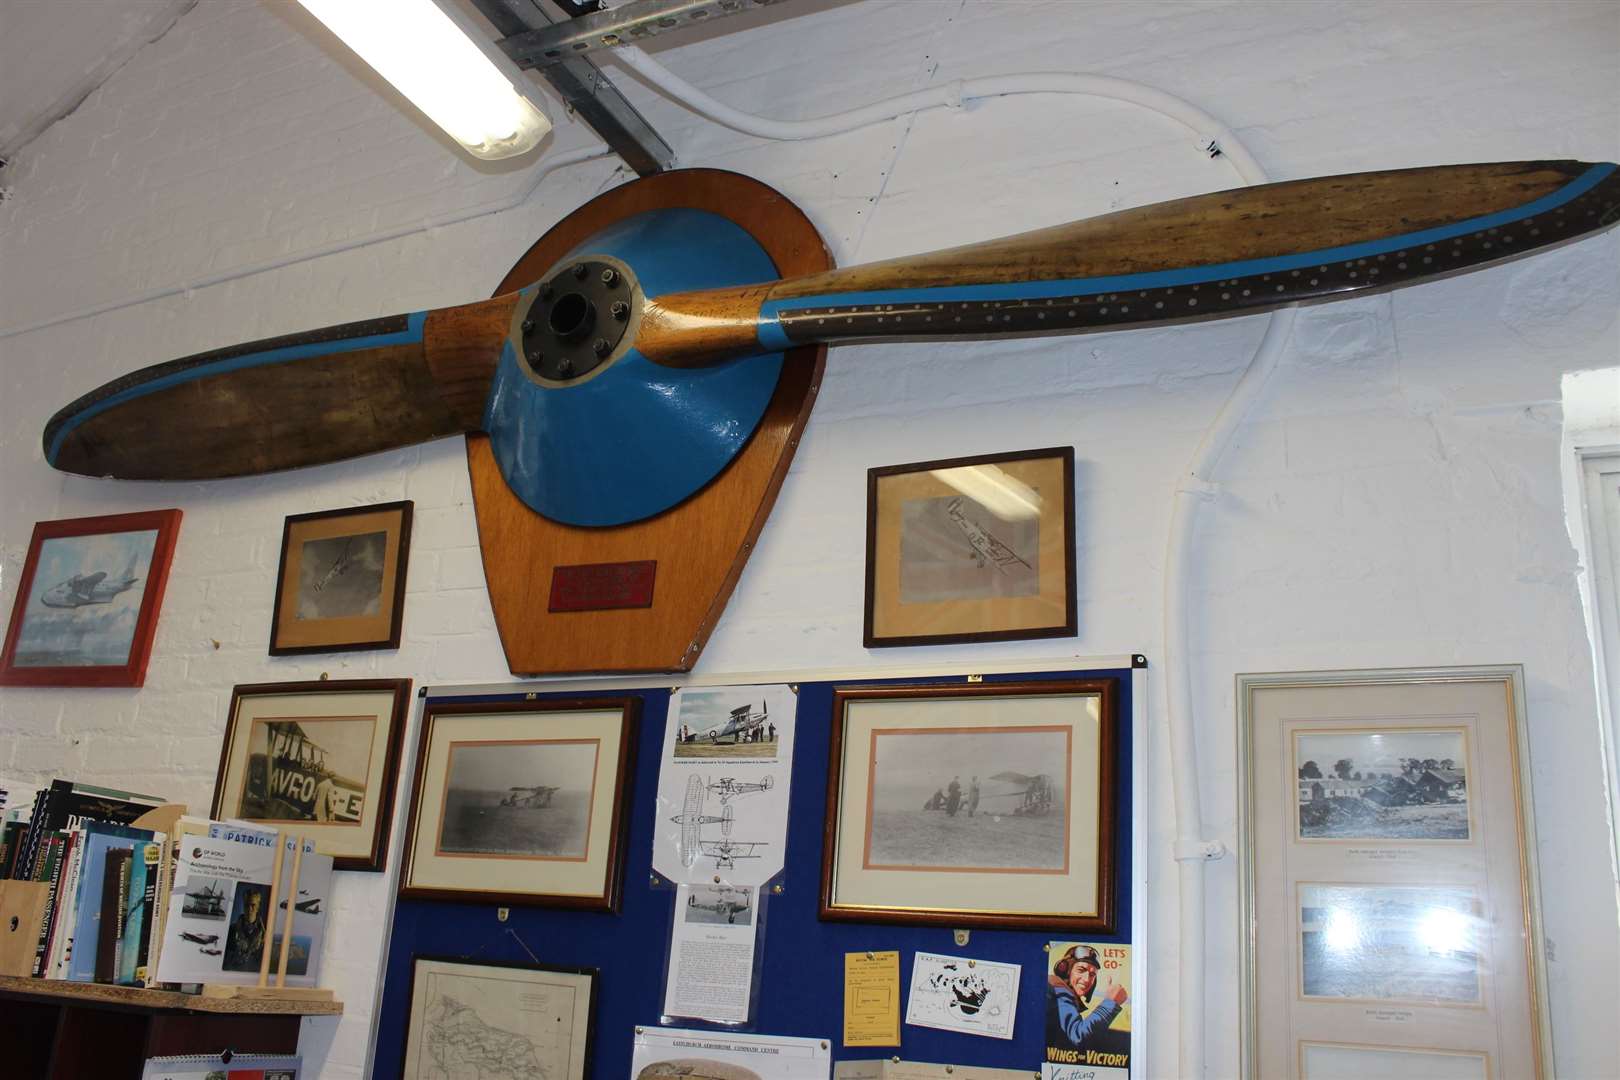 Inside the Eastchurch Aviation Museum on the Isle of Sheppey which was the birthplace of British aviation